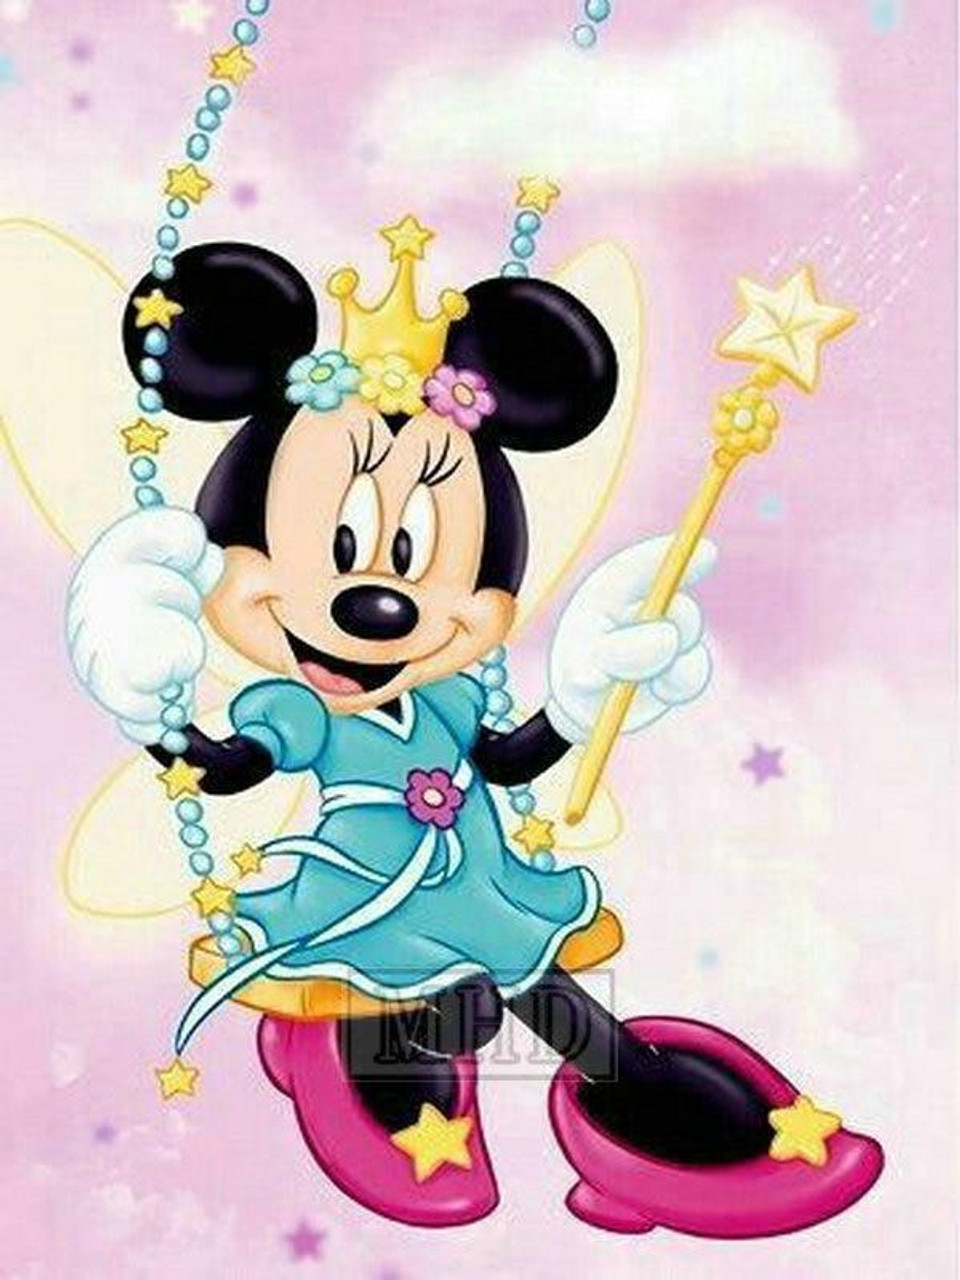 PRINCESS MINNIE MOUSE - MINNIE MOUSE PAINTING